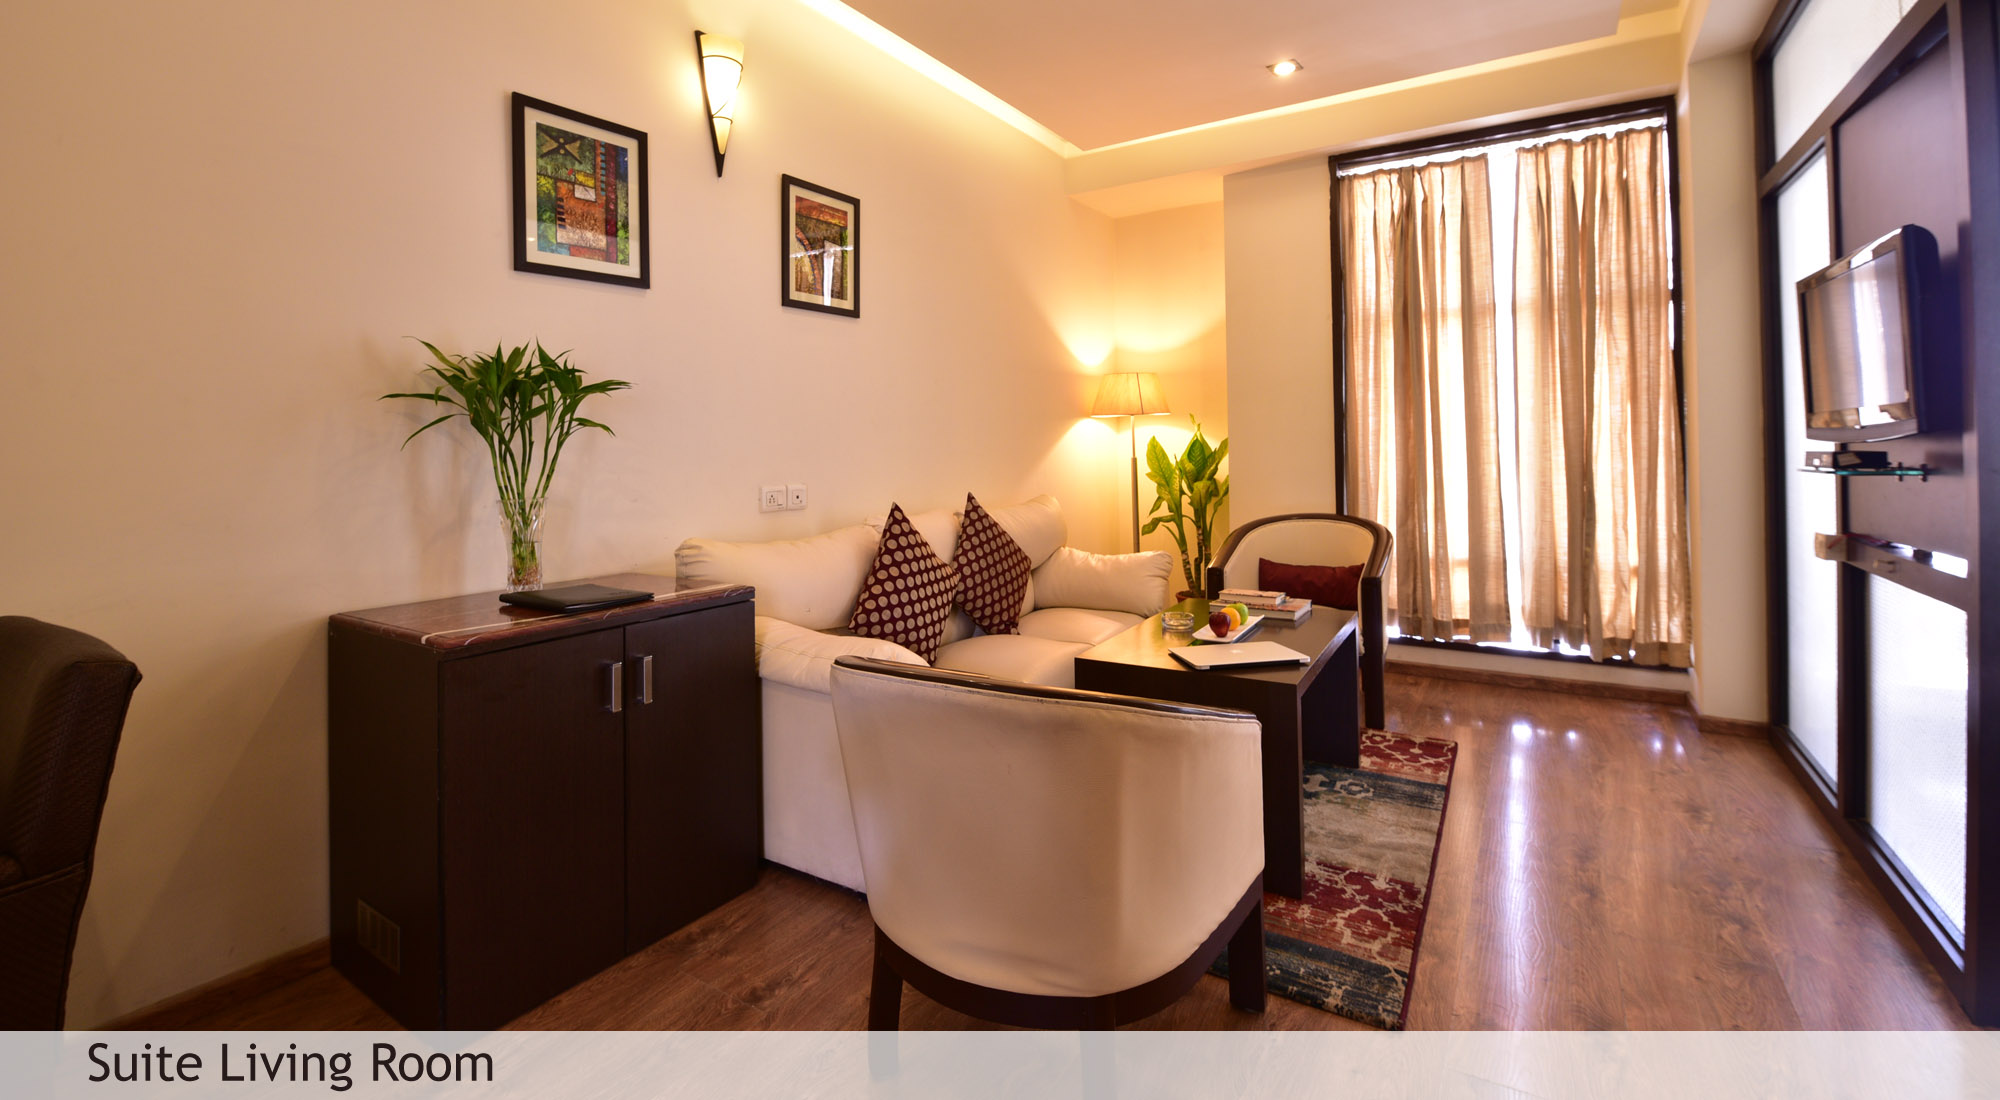 furnished rooms & accommodation in kota